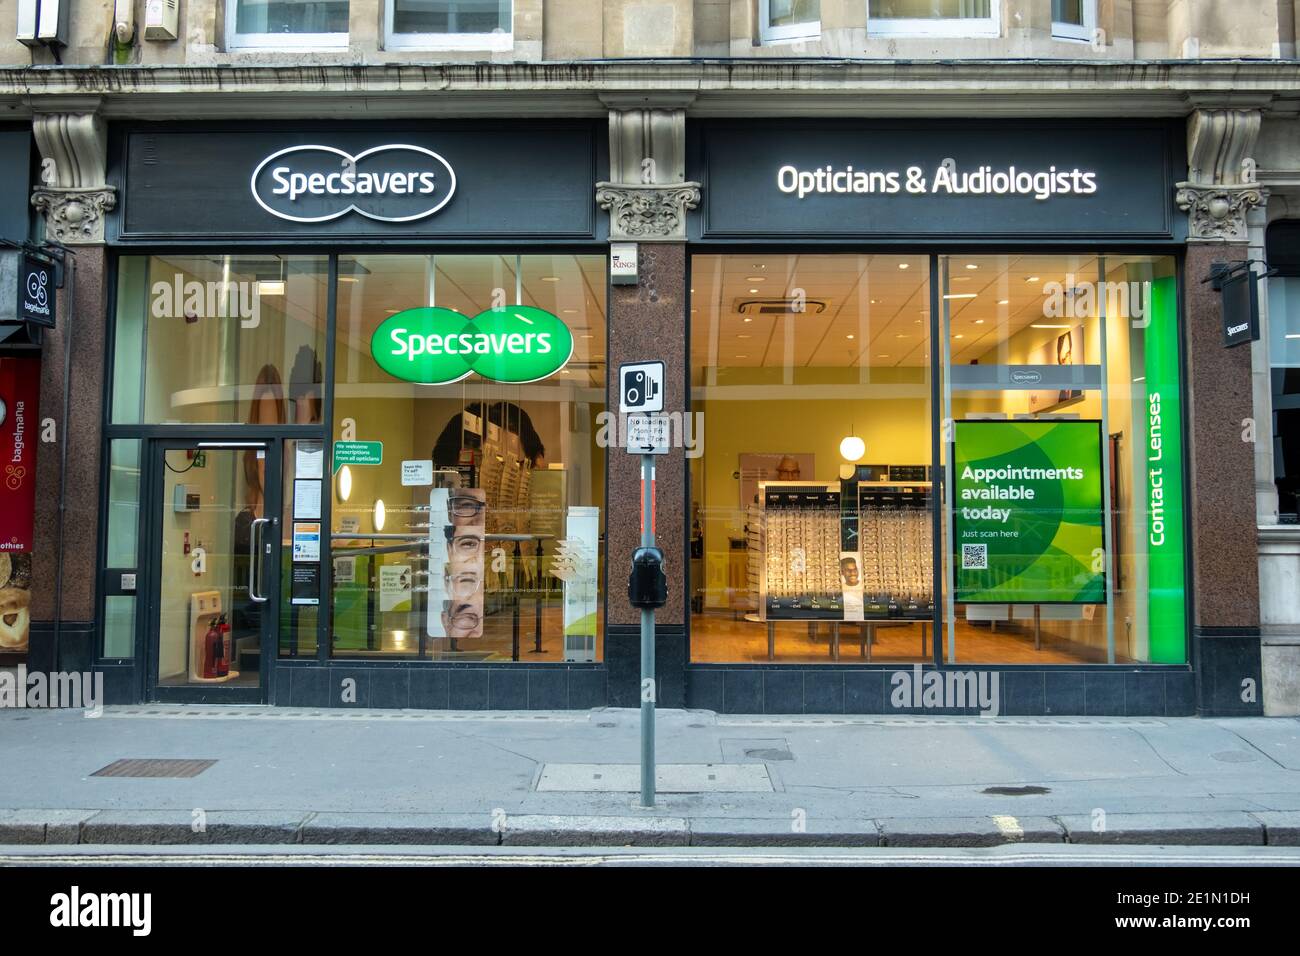 London- Specsavers opticians, a British optical retail chain Stock Photo